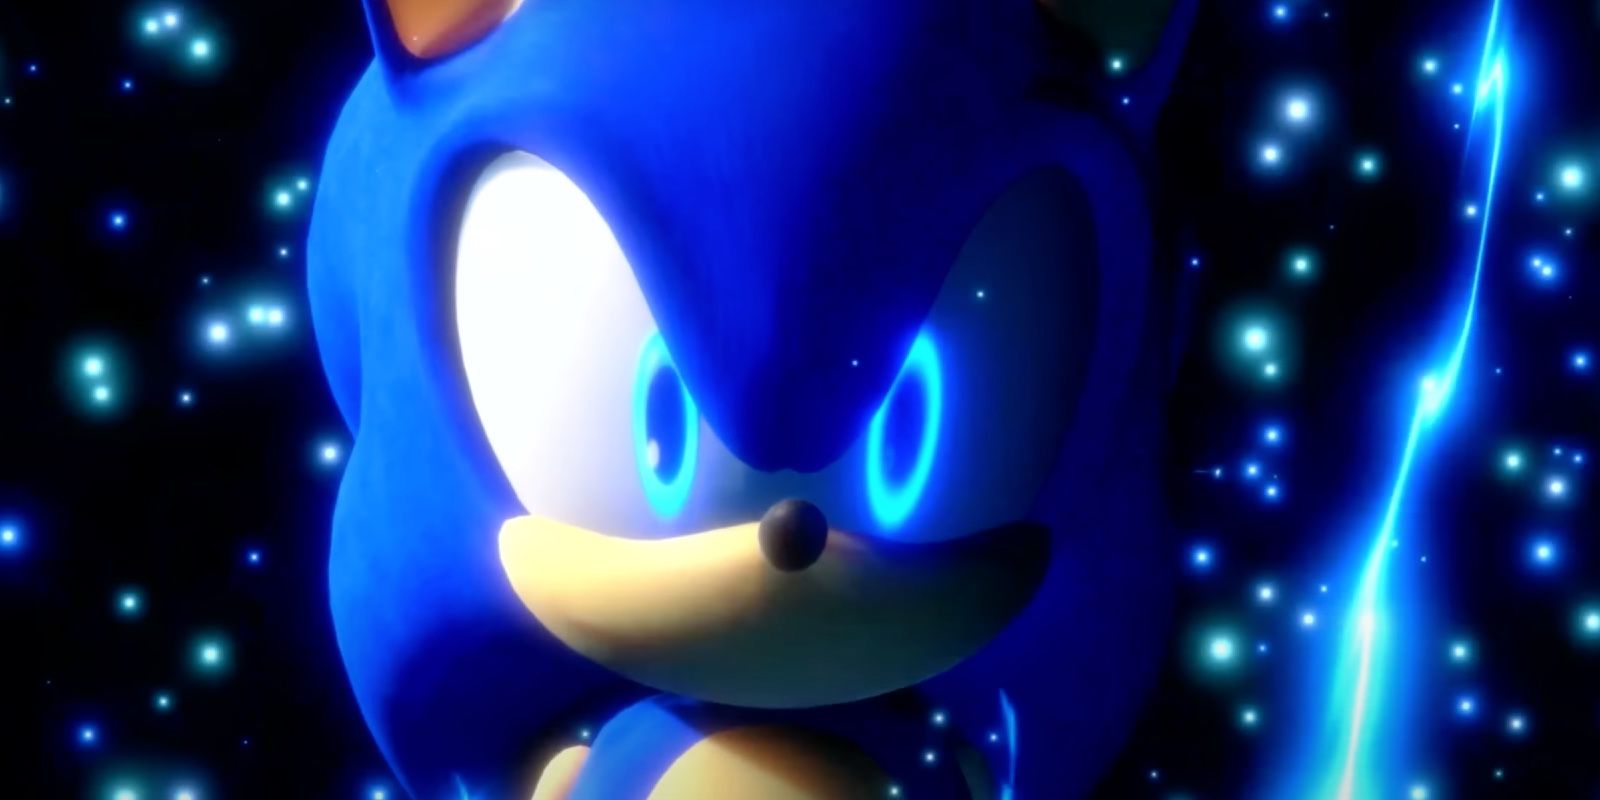 Sonic Frontiers release date, trailers, gameplay, and more